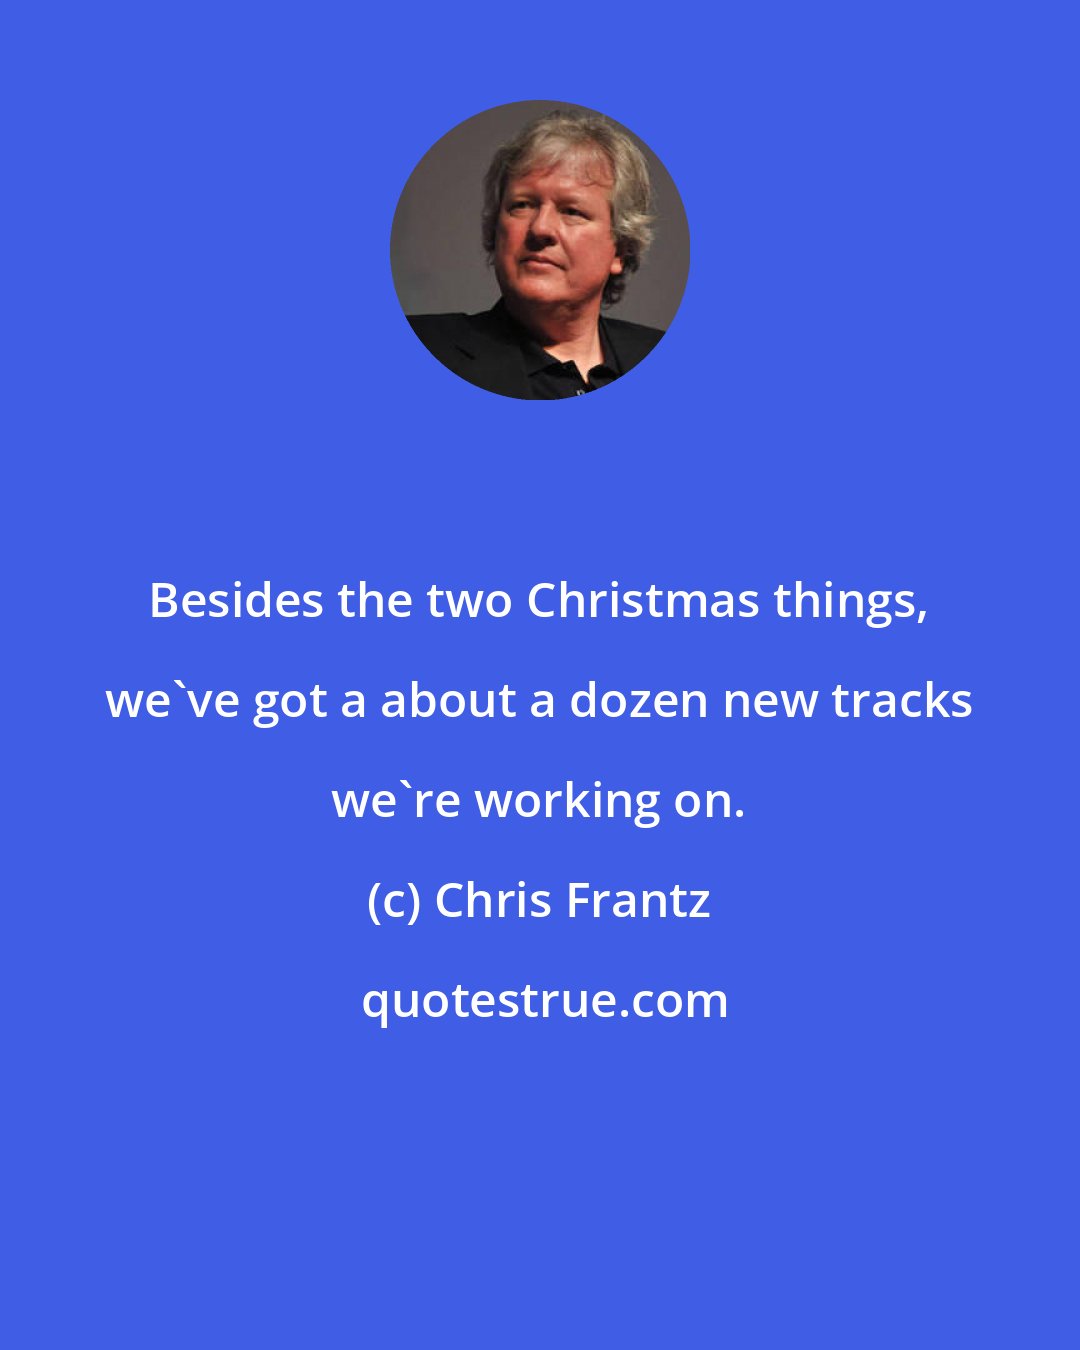 Chris Frantz: Besides the two Christmas things, we've got a about a dozen new tracks we're working on.